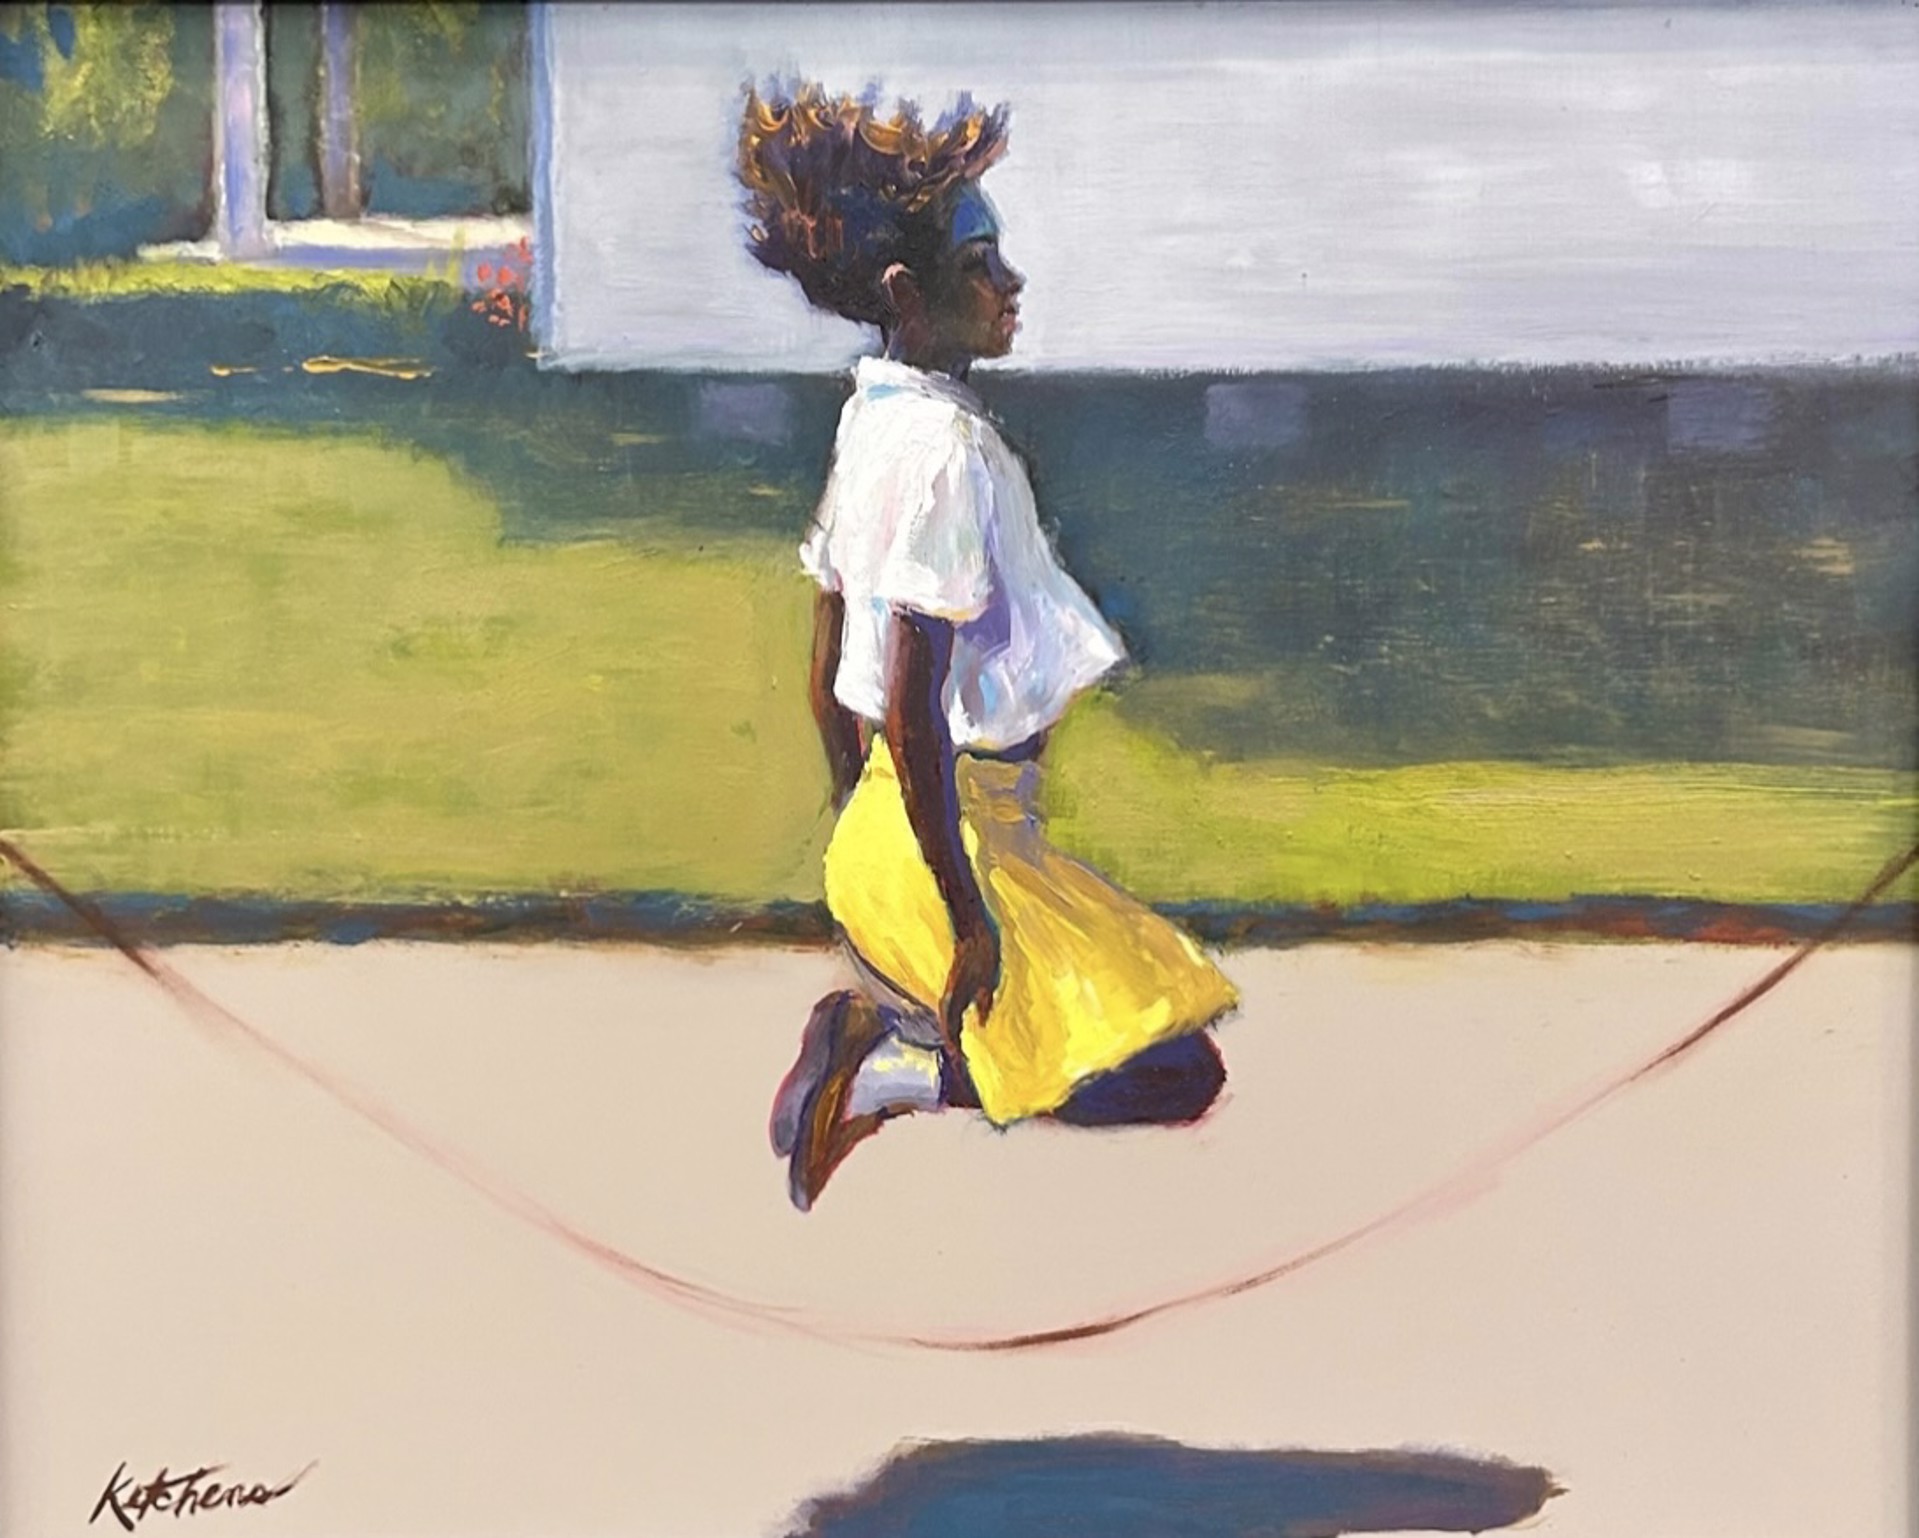 "Yellow Rope Jumper" by Robert Ketchens